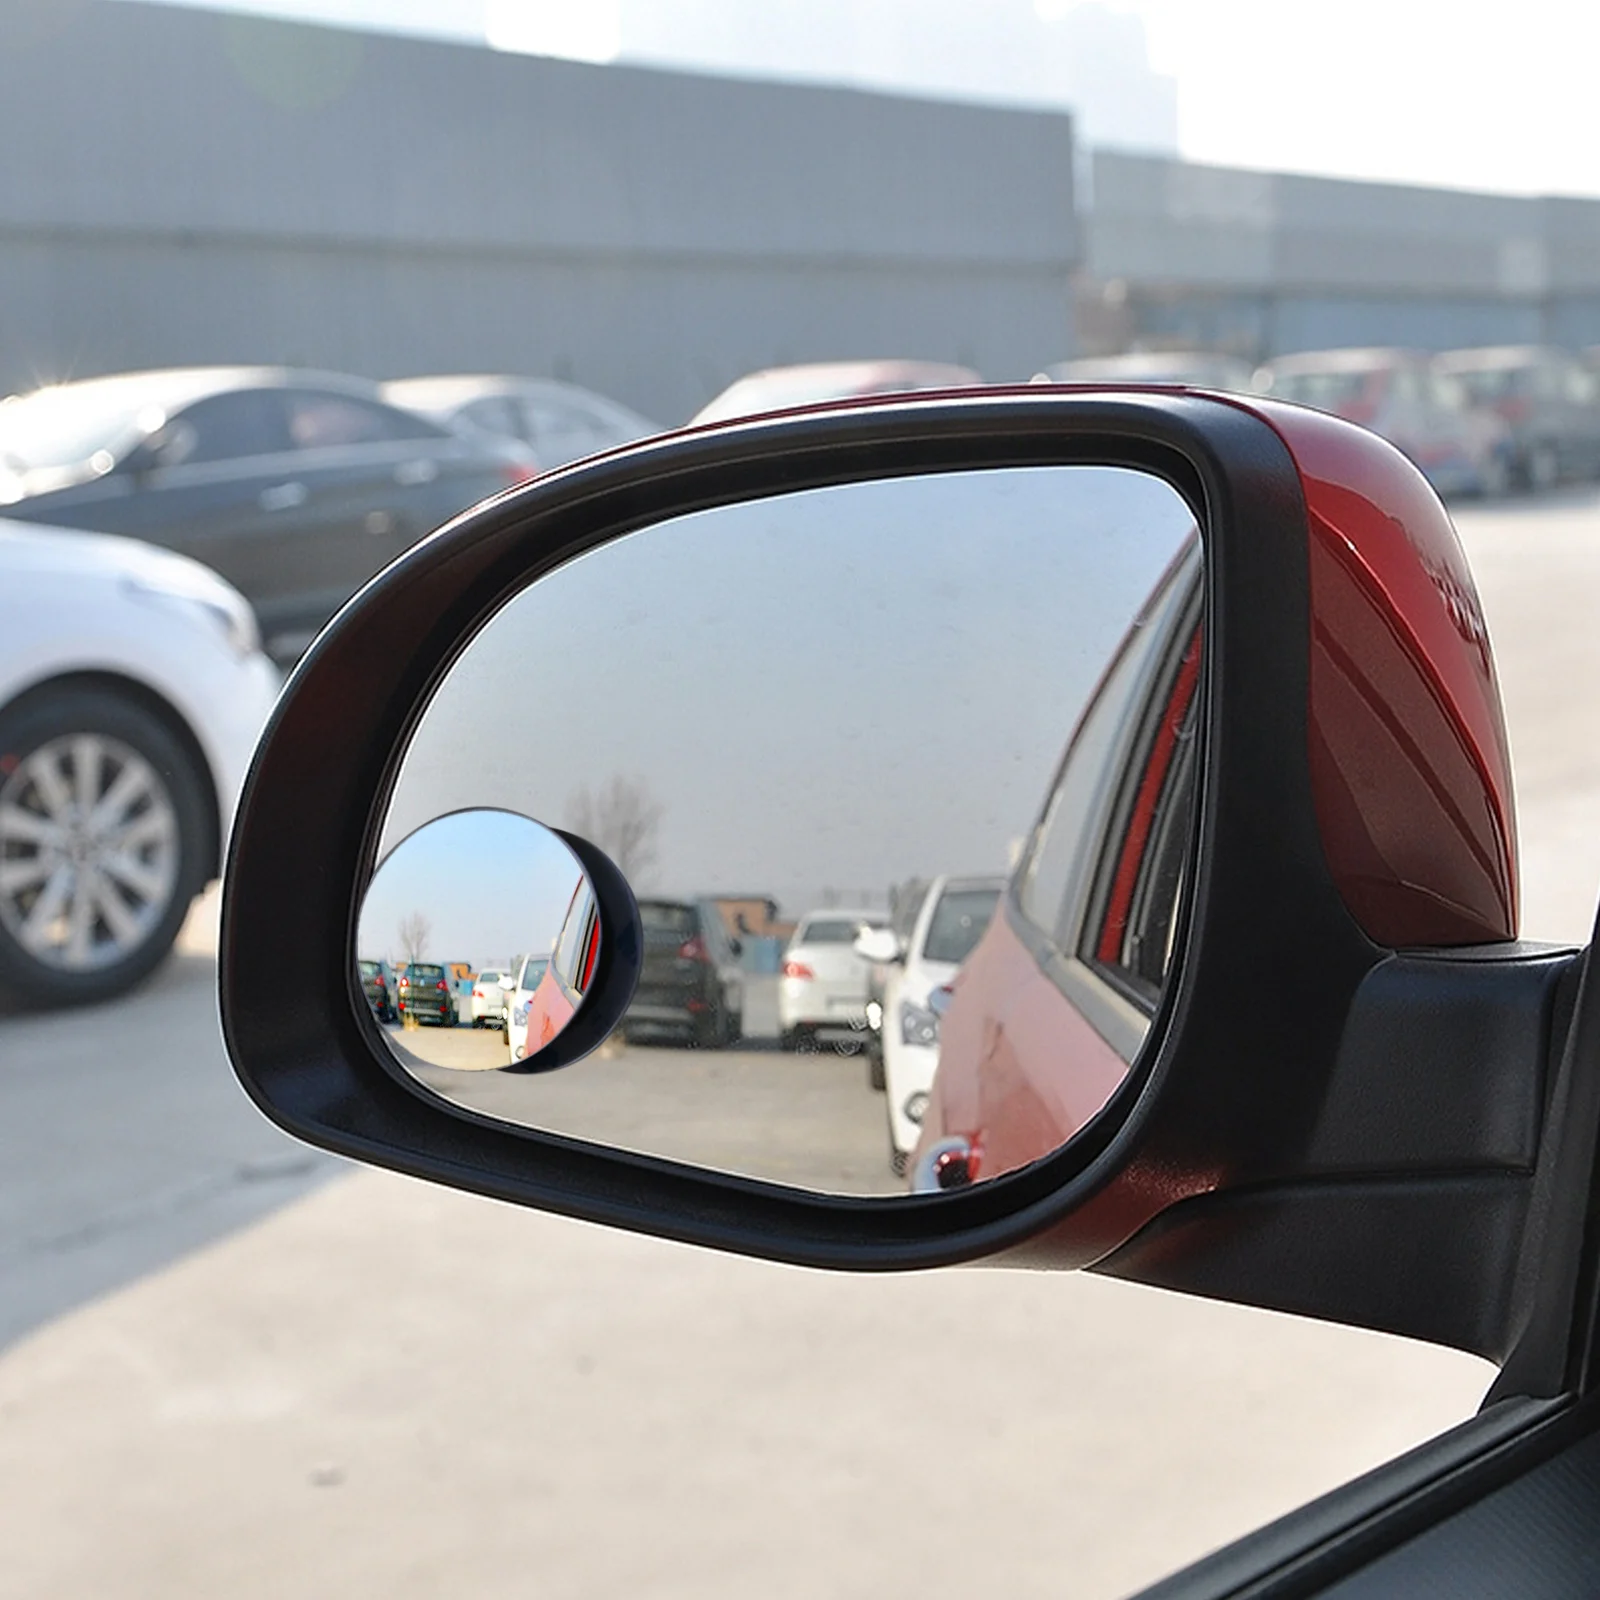 Albums 91+ Images what kind of mirror is a car mirror Latest